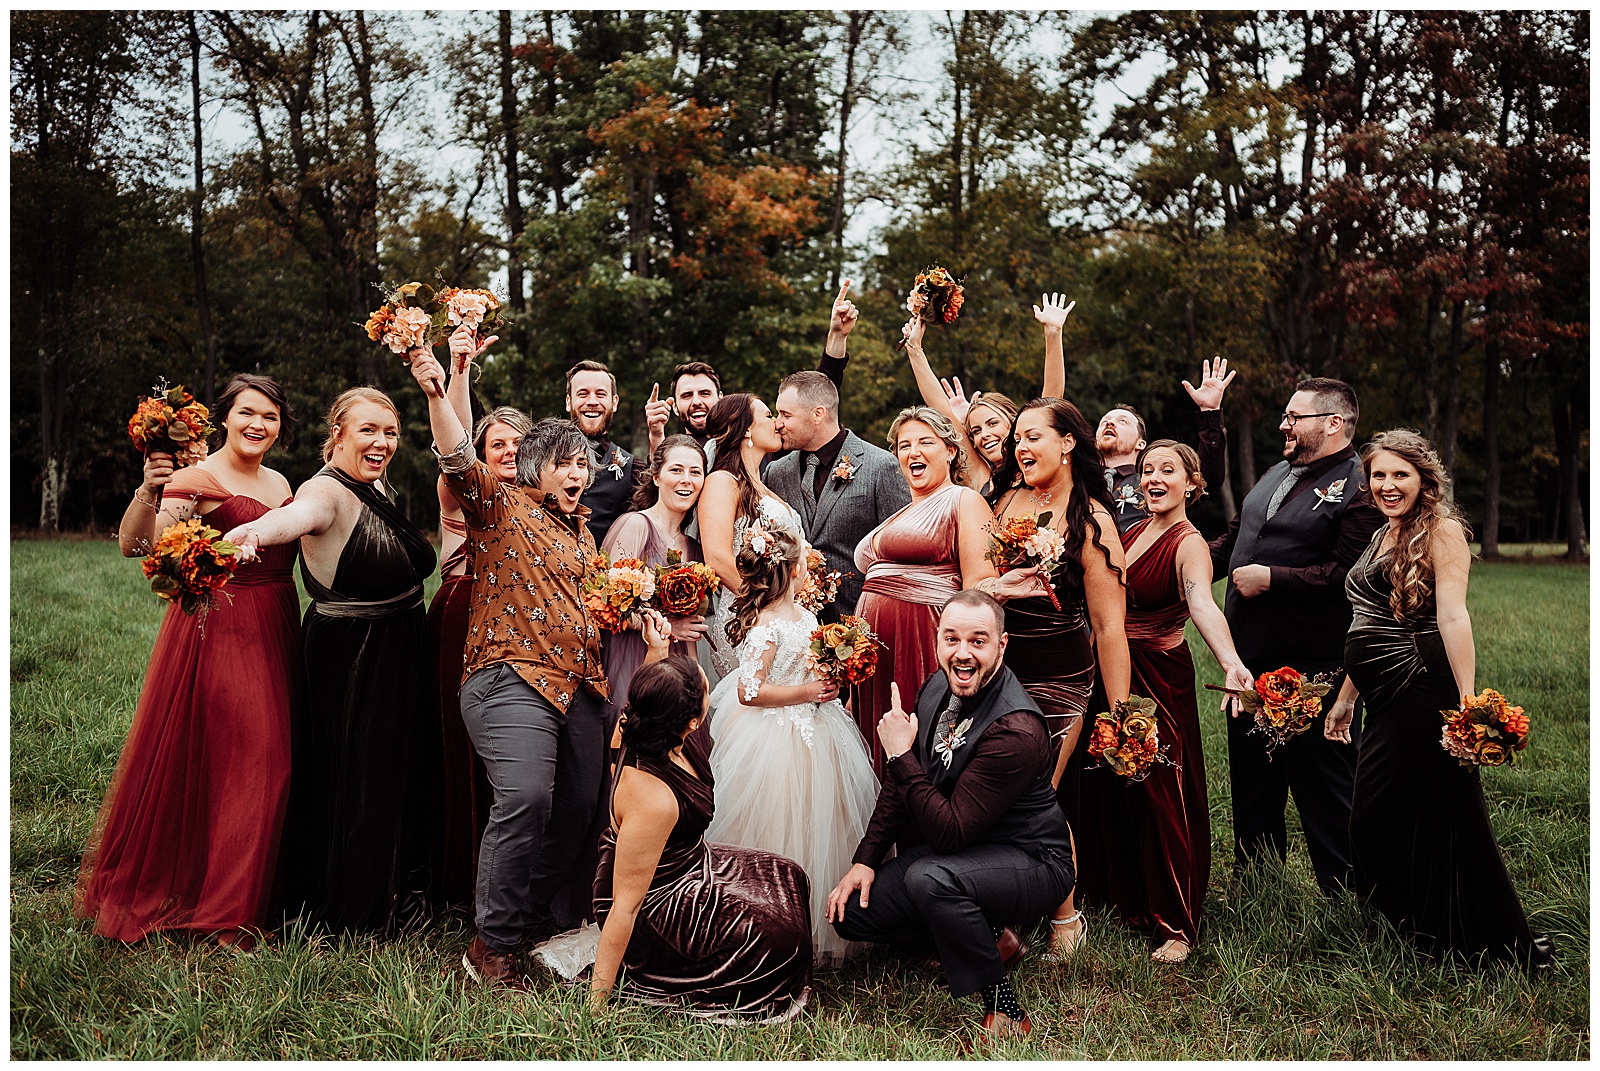 Bridal Party at Tuck'd Inn Farm Event Center in Cooksburg PA